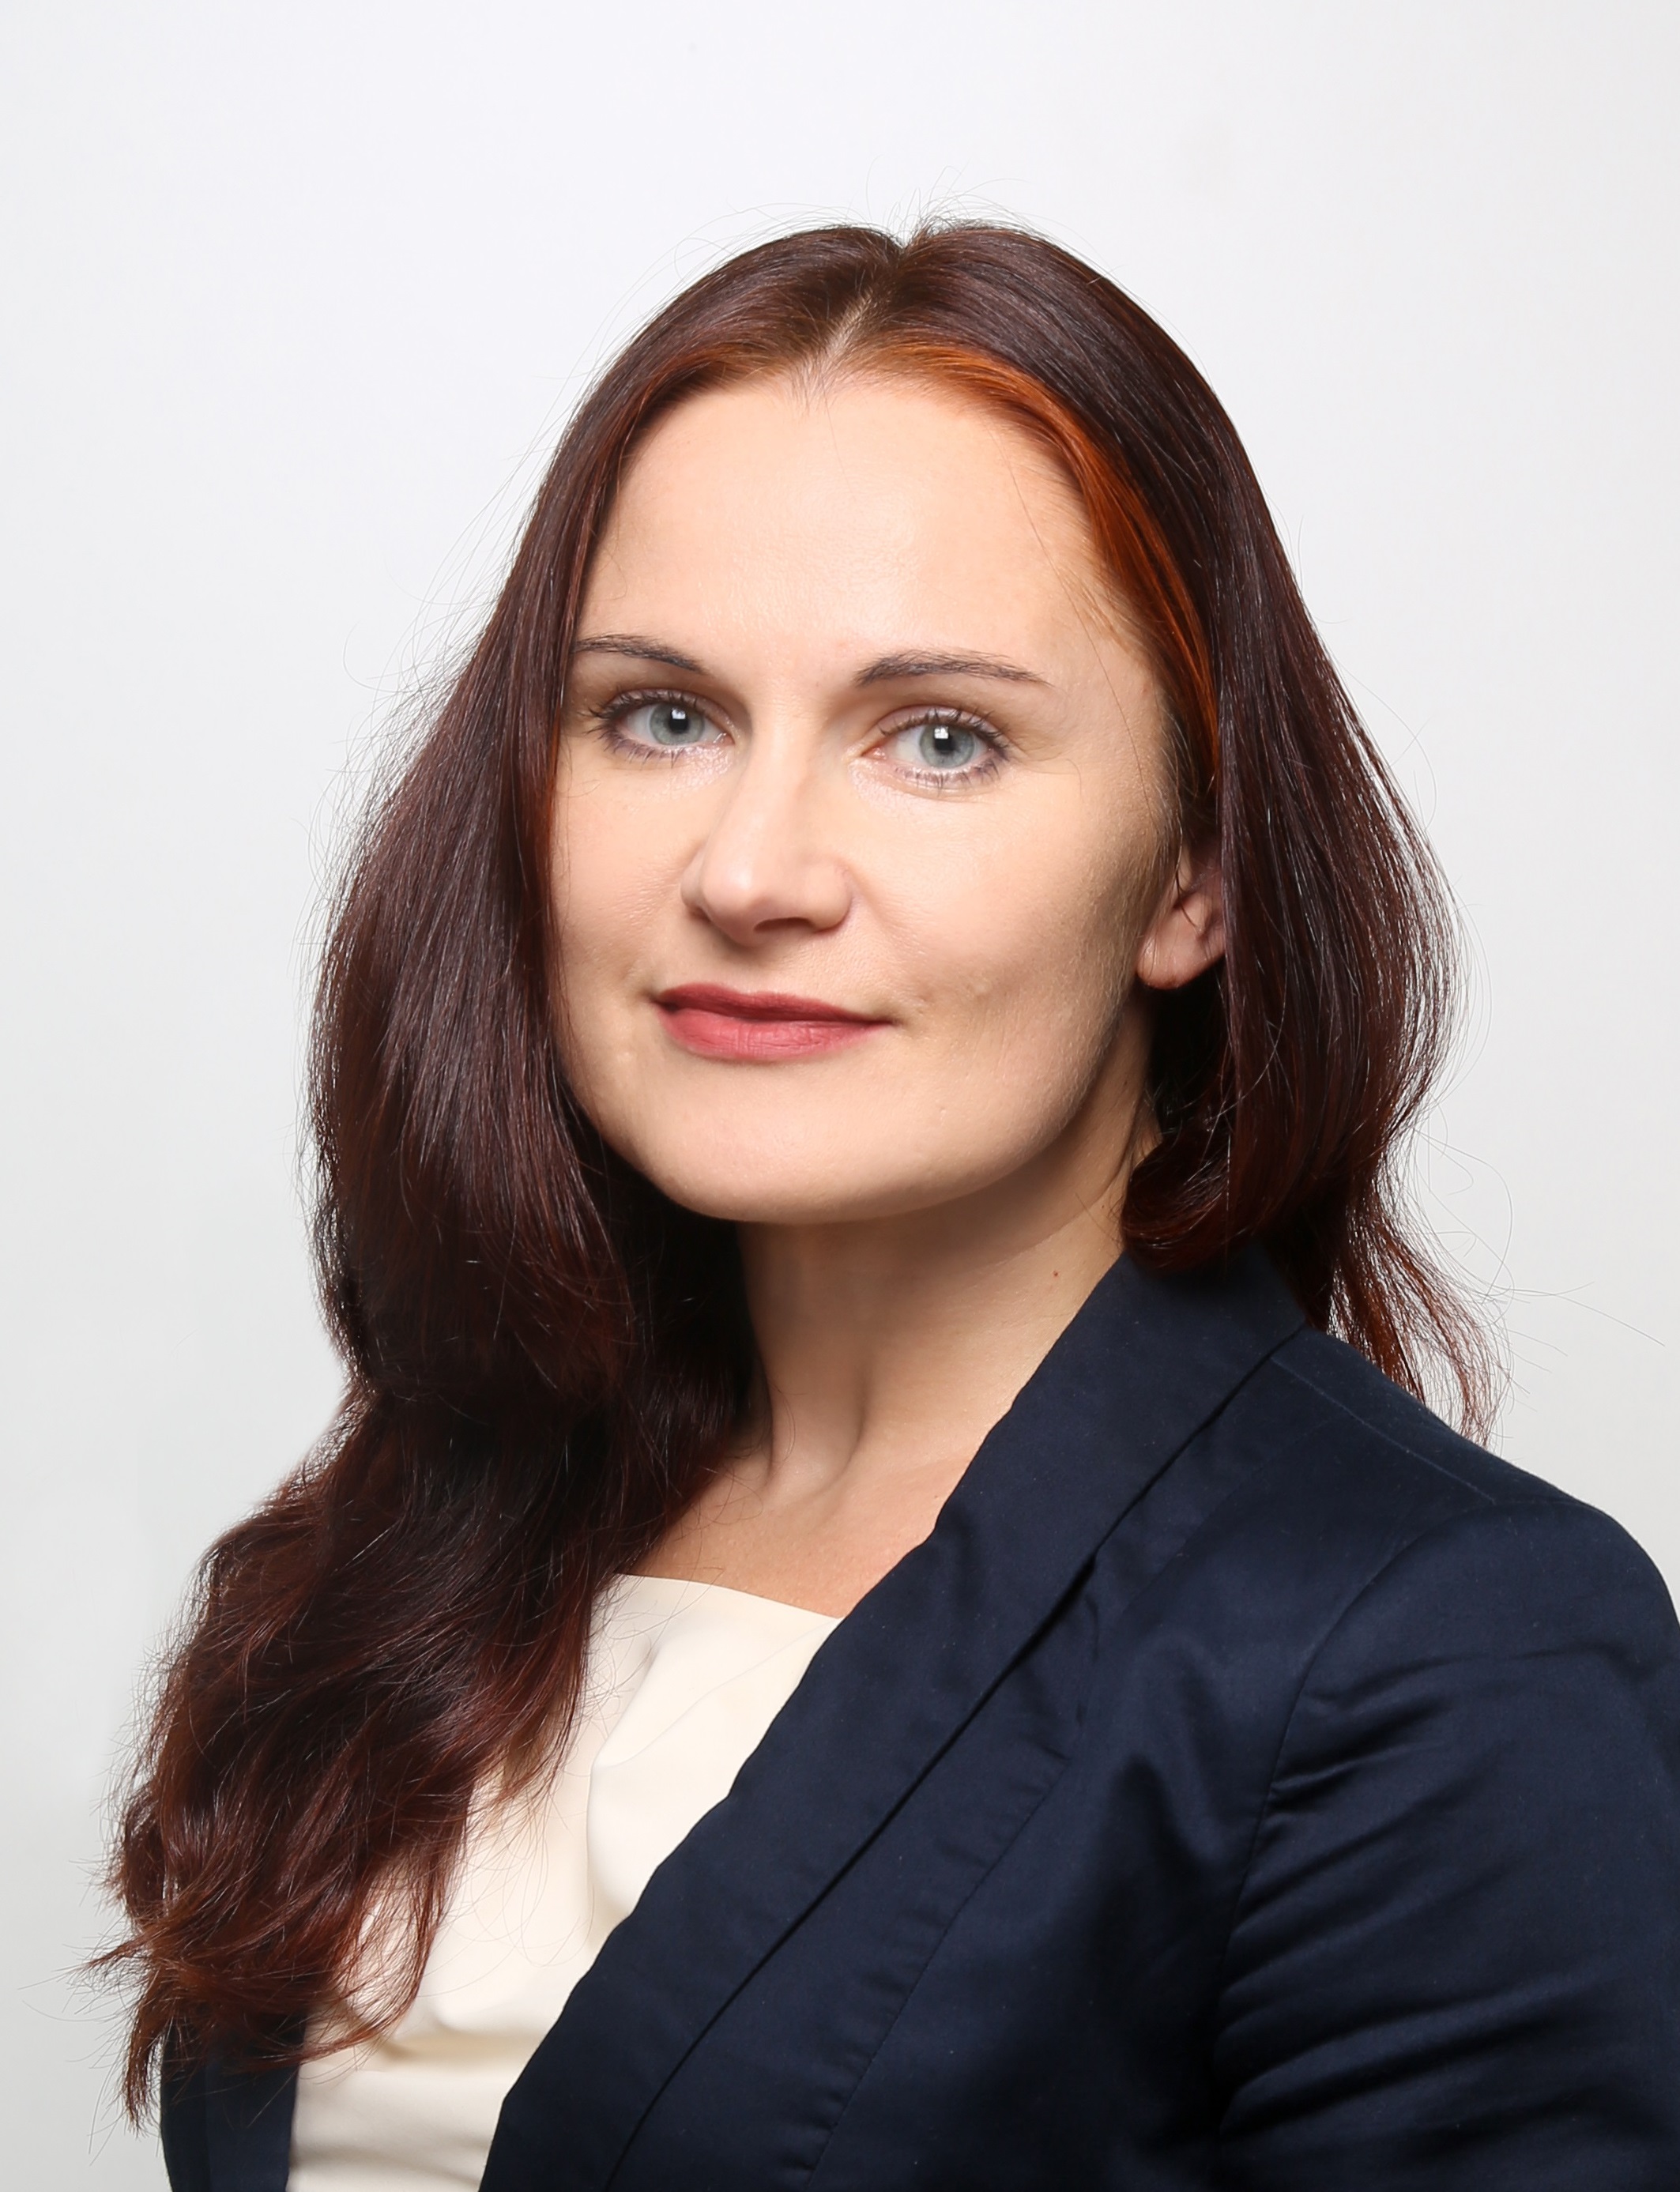 Speaking to CivilNet, Anna Pobol, an EU4Digital ICT innovation expert, explains why the increase of women’s involvement in the industry is so important.